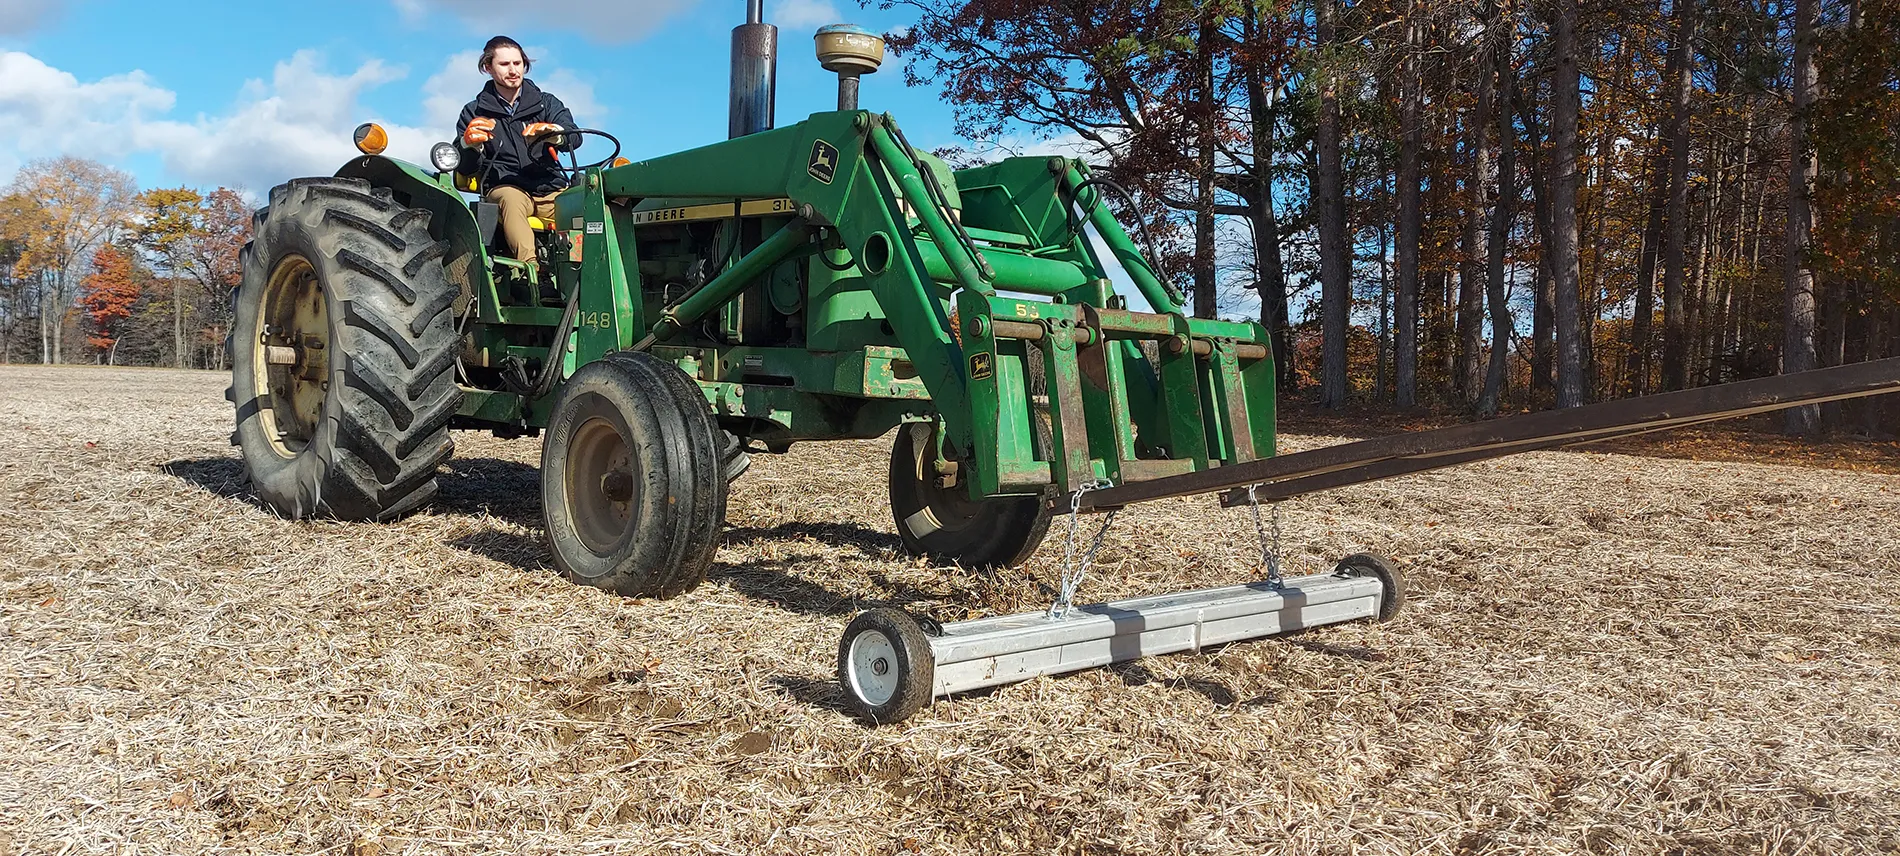 Nyx Heavy Duty Magnetic Sweeper for Farms